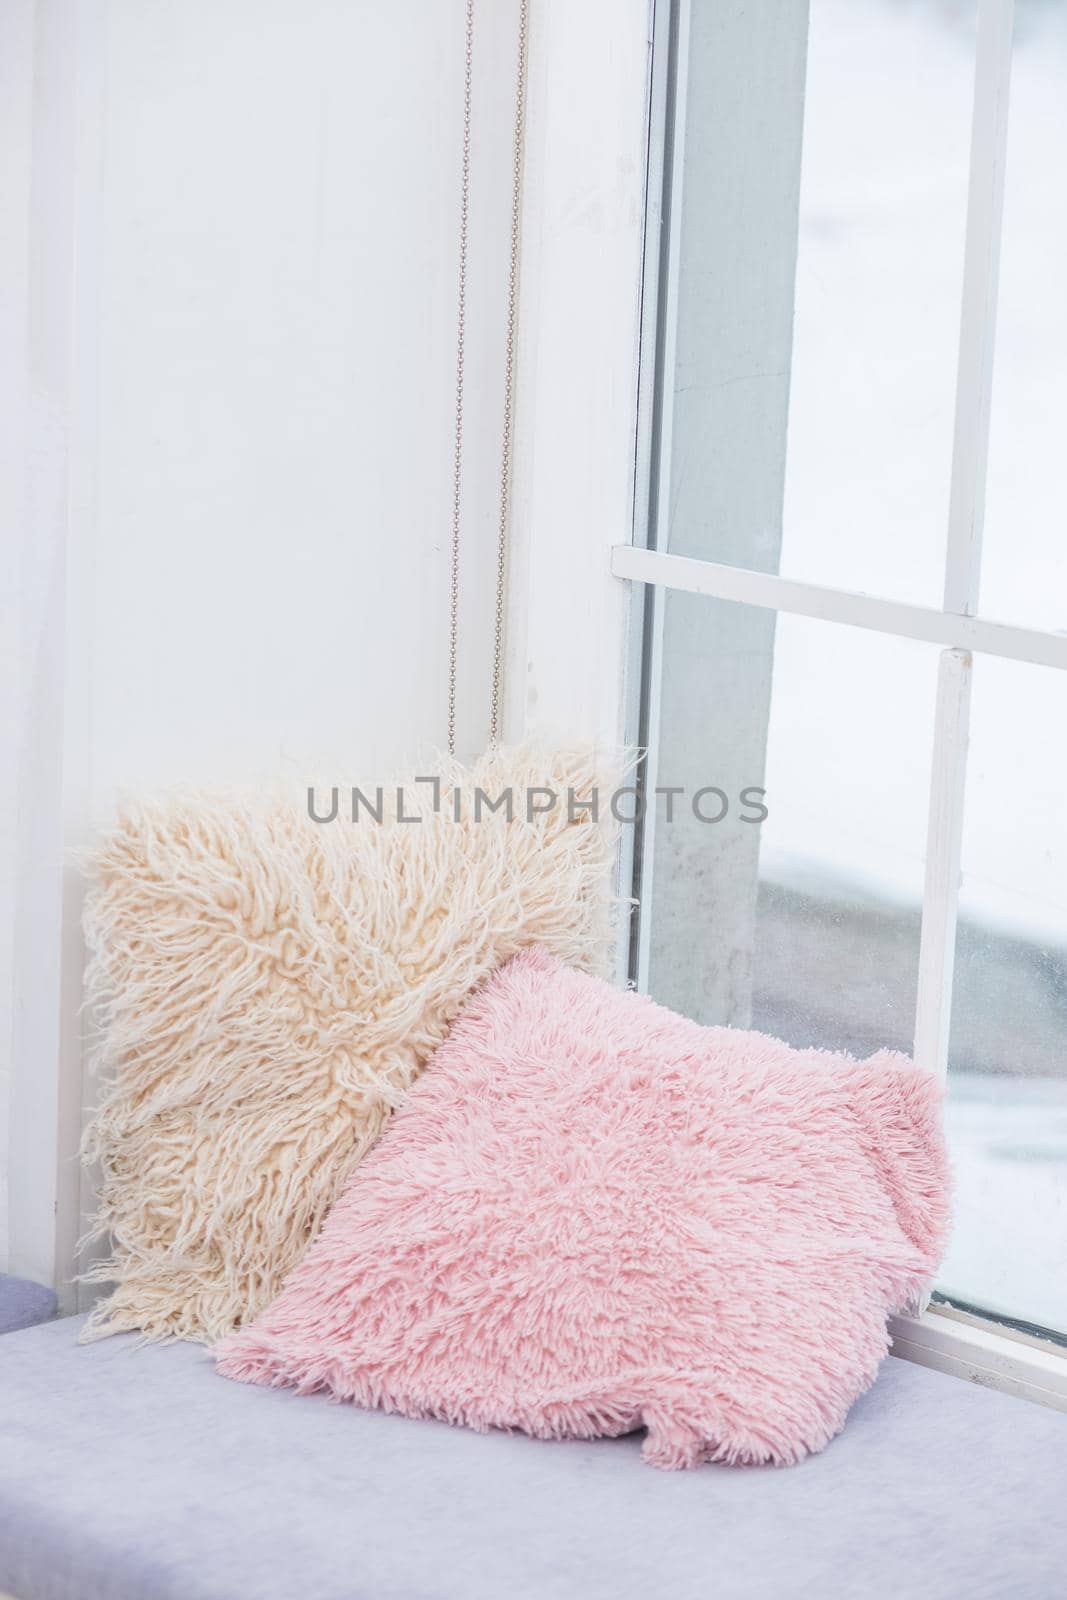 Decorative pillows with long pile pillowcases lie on the windowsill, reading area by the window